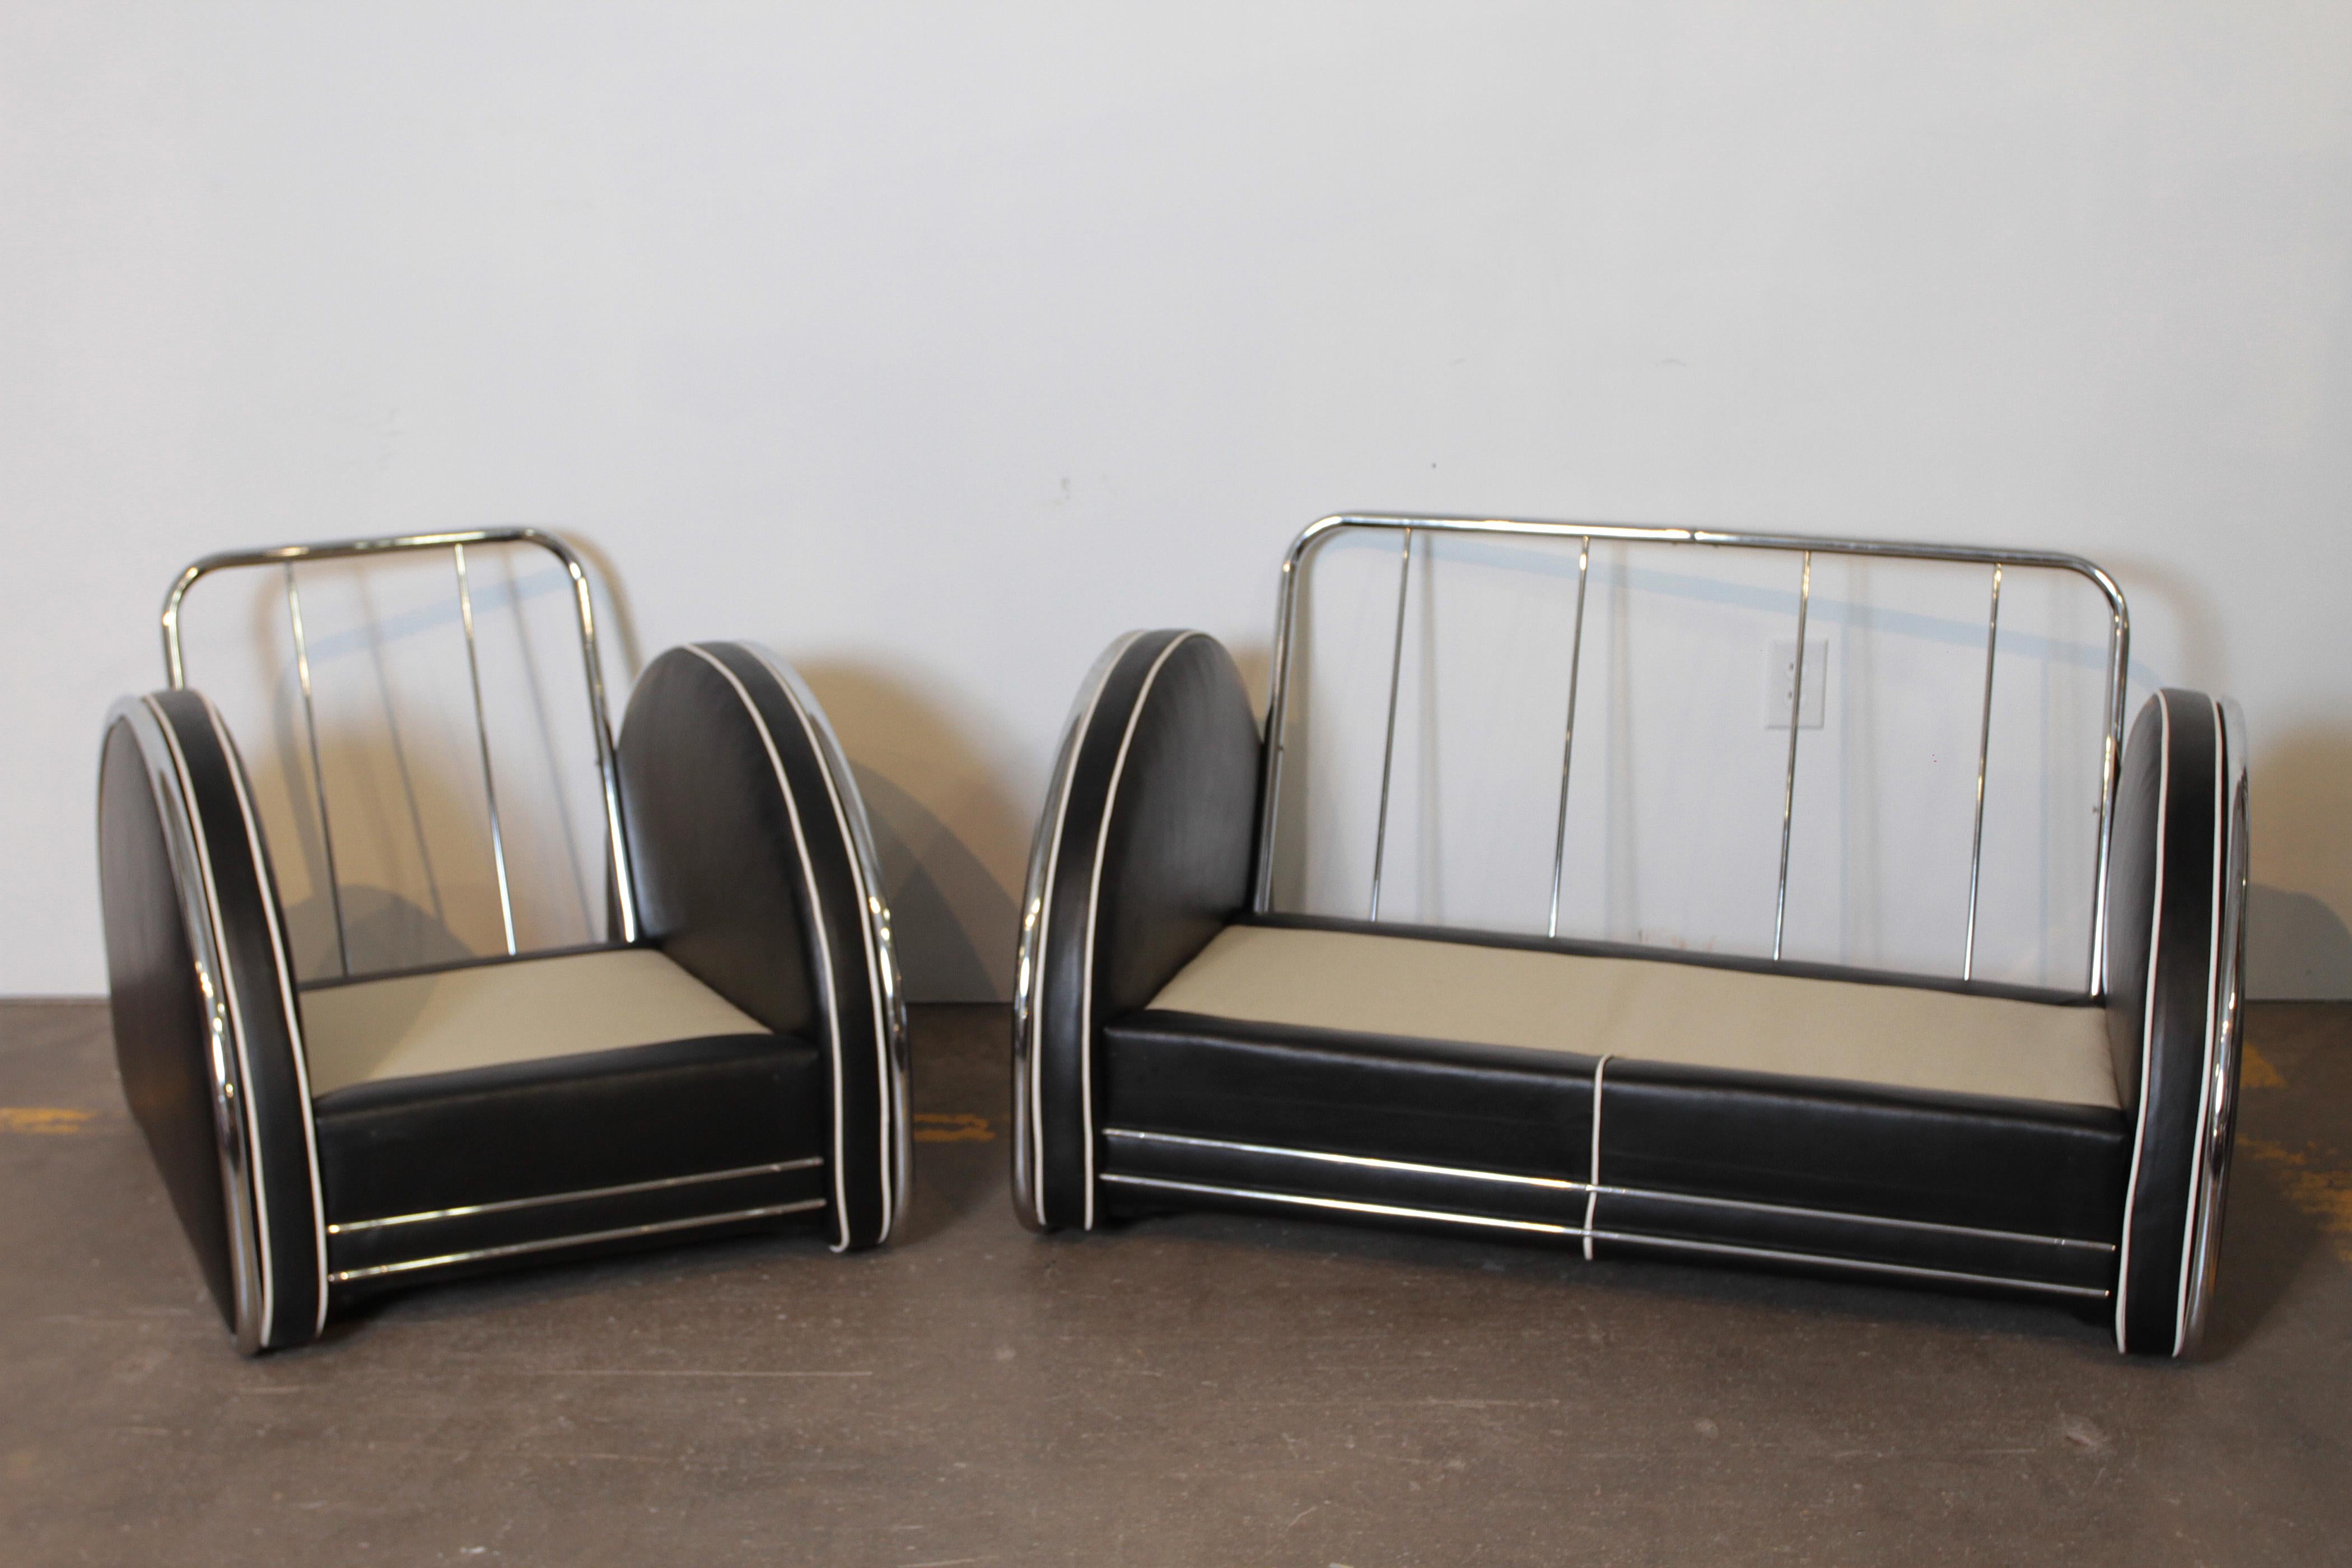 Mid-20th Century Donald Deskey Machine Age Art Deco Royalchrome Settee and Chair Living Room Set